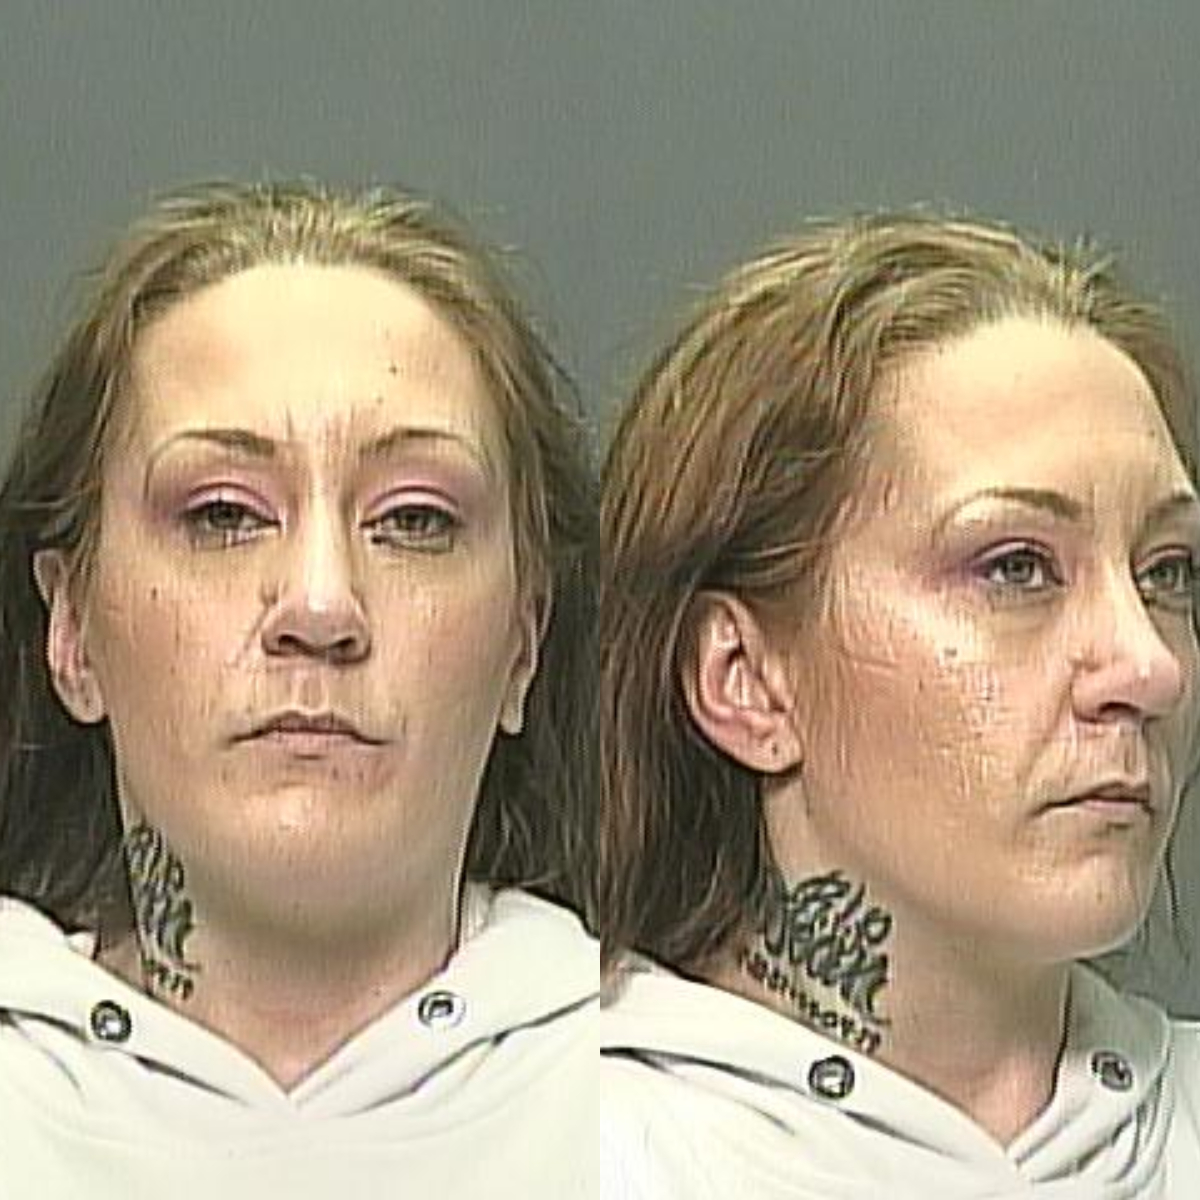 Leah Carol Clifton, 34, was the subject of a Canada-wide arrest warrant for second-degree murder. .